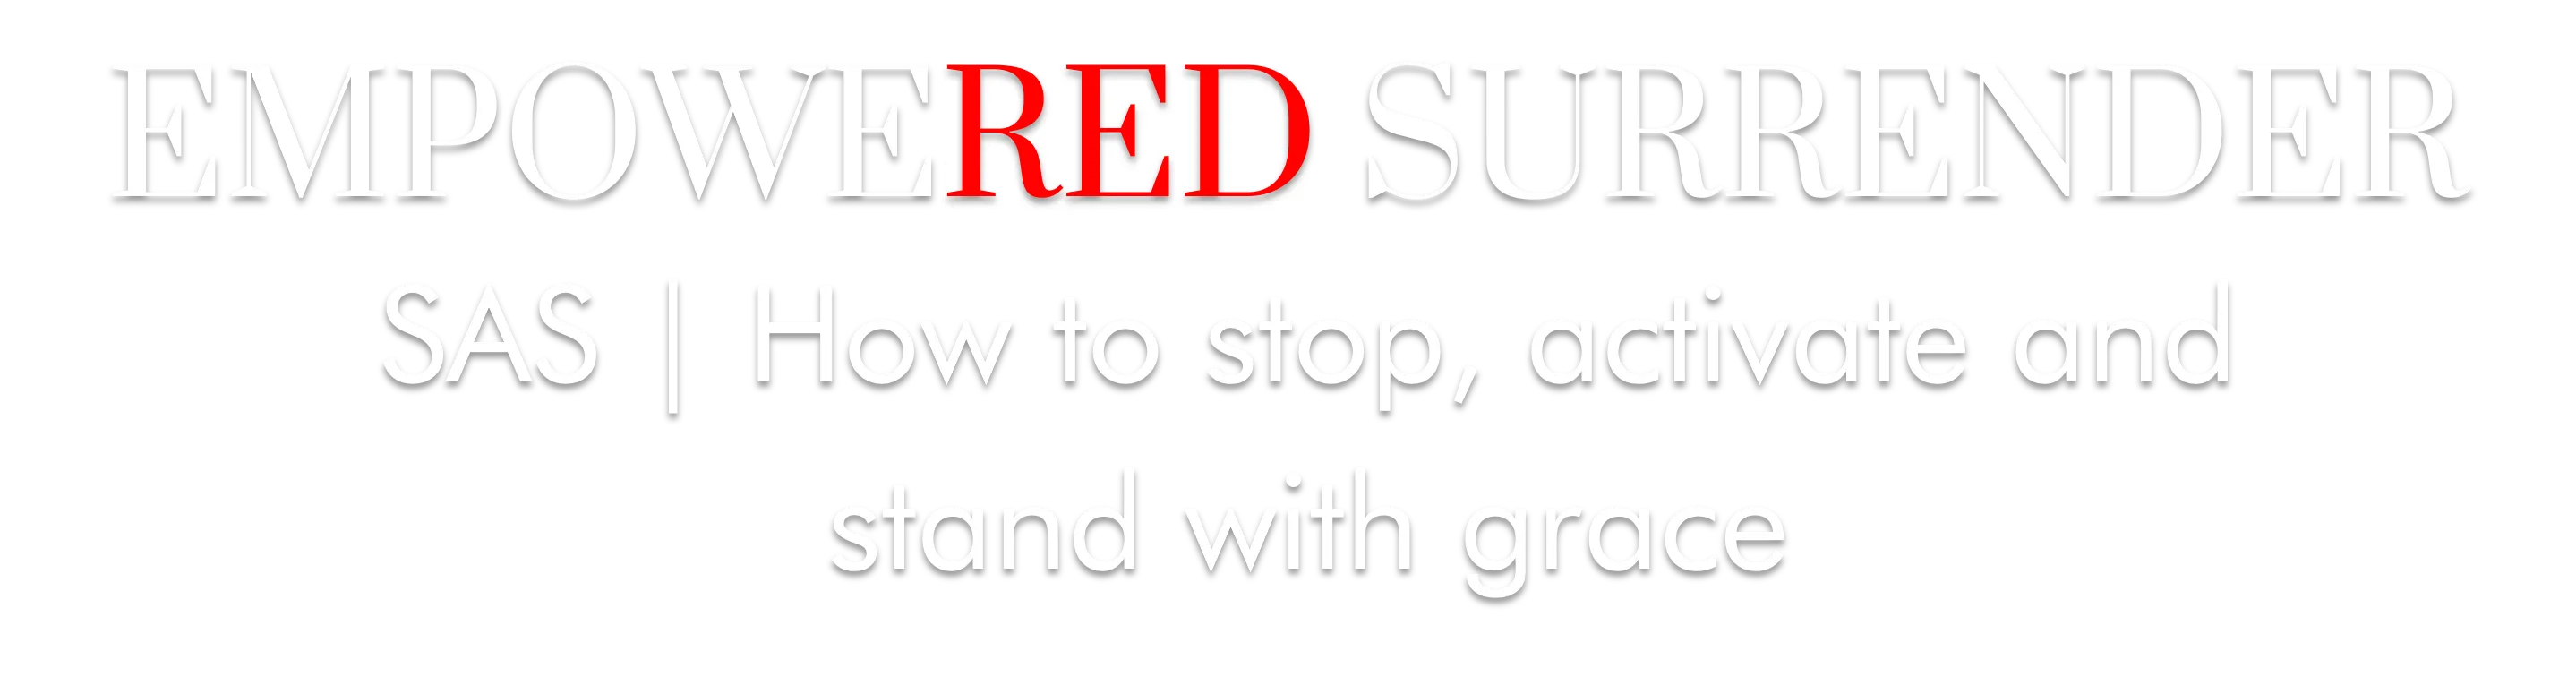 Empowered Surrender How to stop, activate and stand with grace